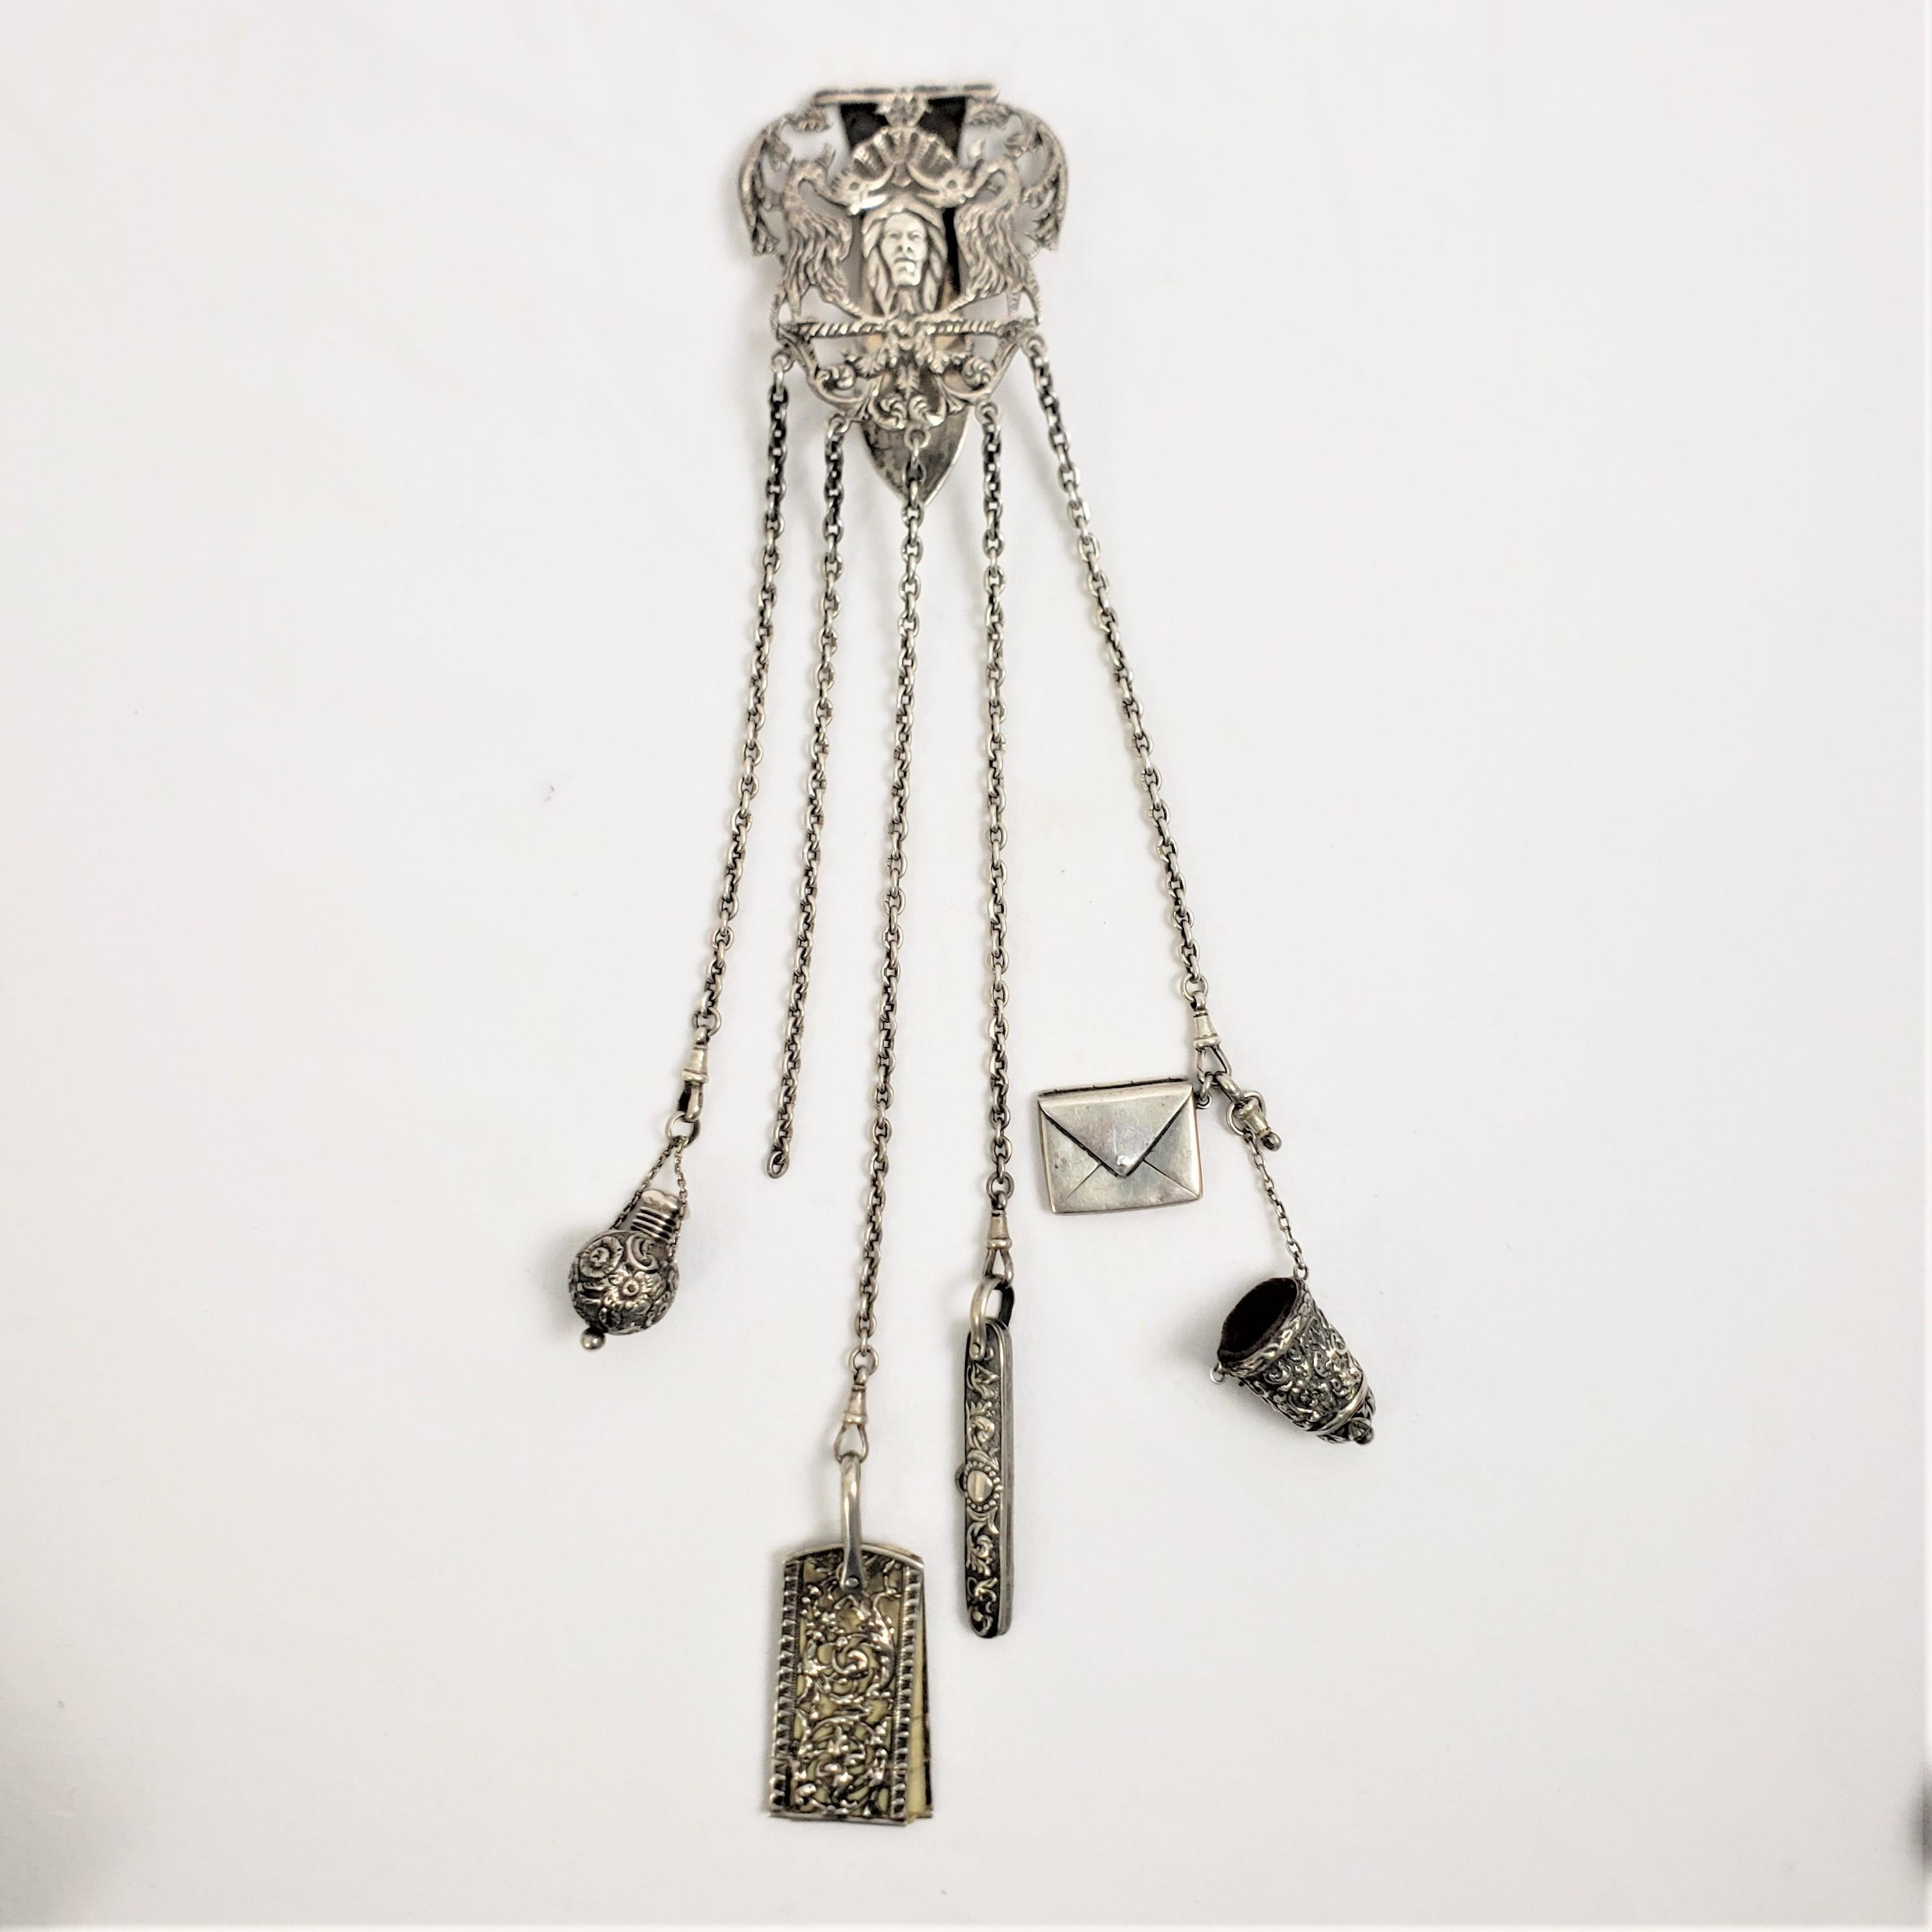 This chatelain originates from England and dates to approximately 1880 and done in the period Victorian style. This chatelaine is composed of sterling silver and features a clasp that is decorated with a stylized face with an extoc and grotesque